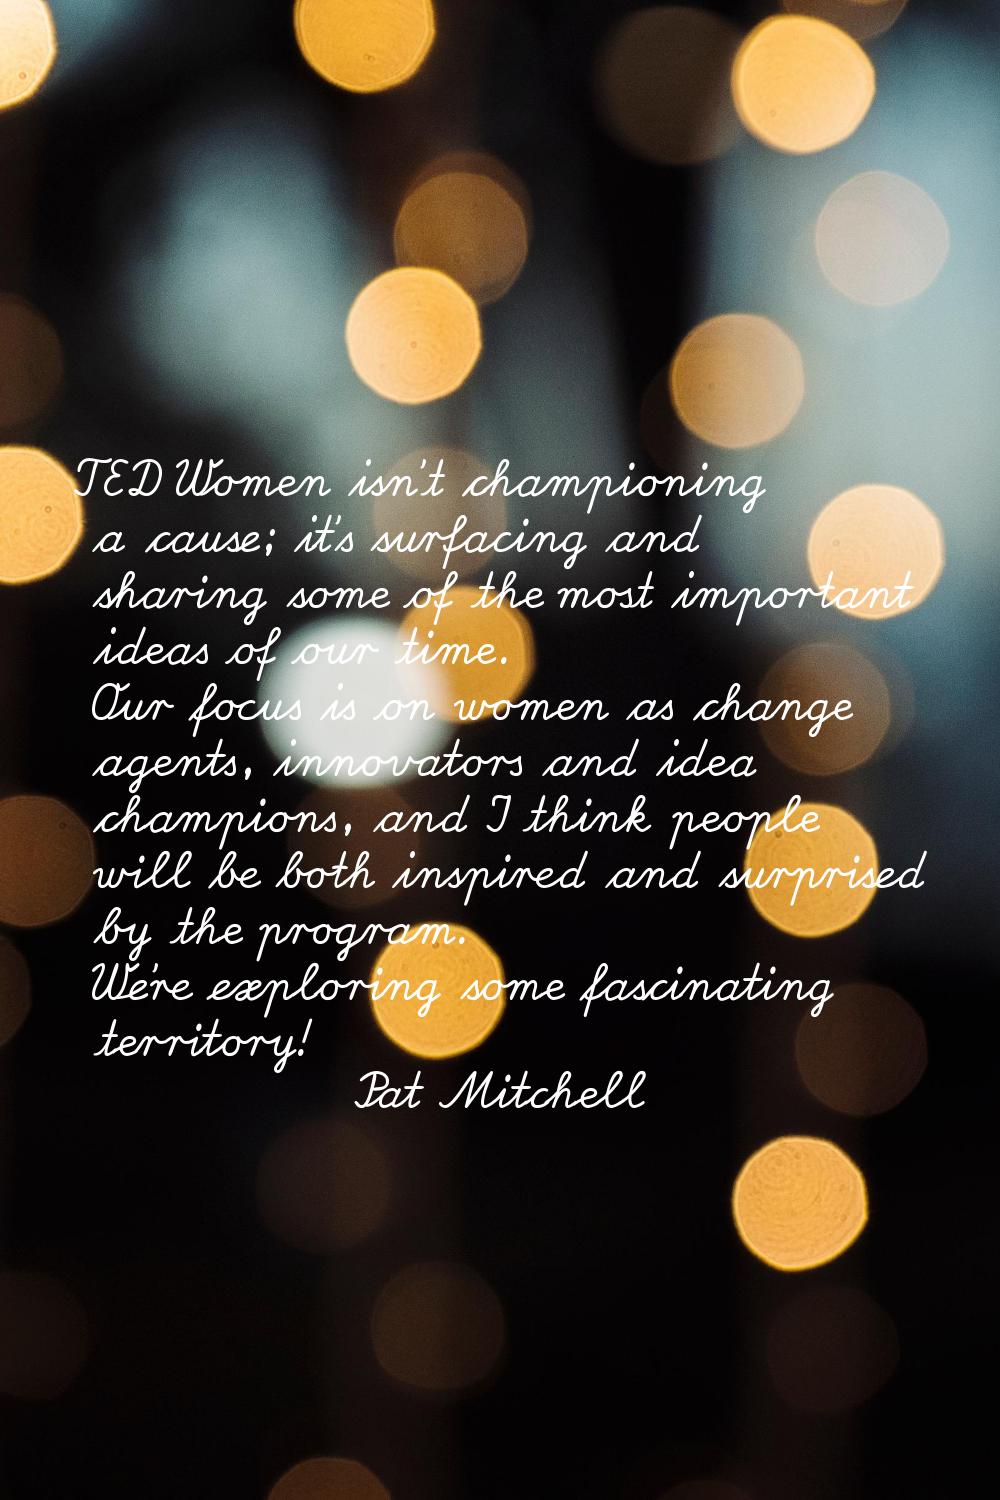 TED Women isn't championing a cause; it's surfacing and sharing some of the most important ideas of